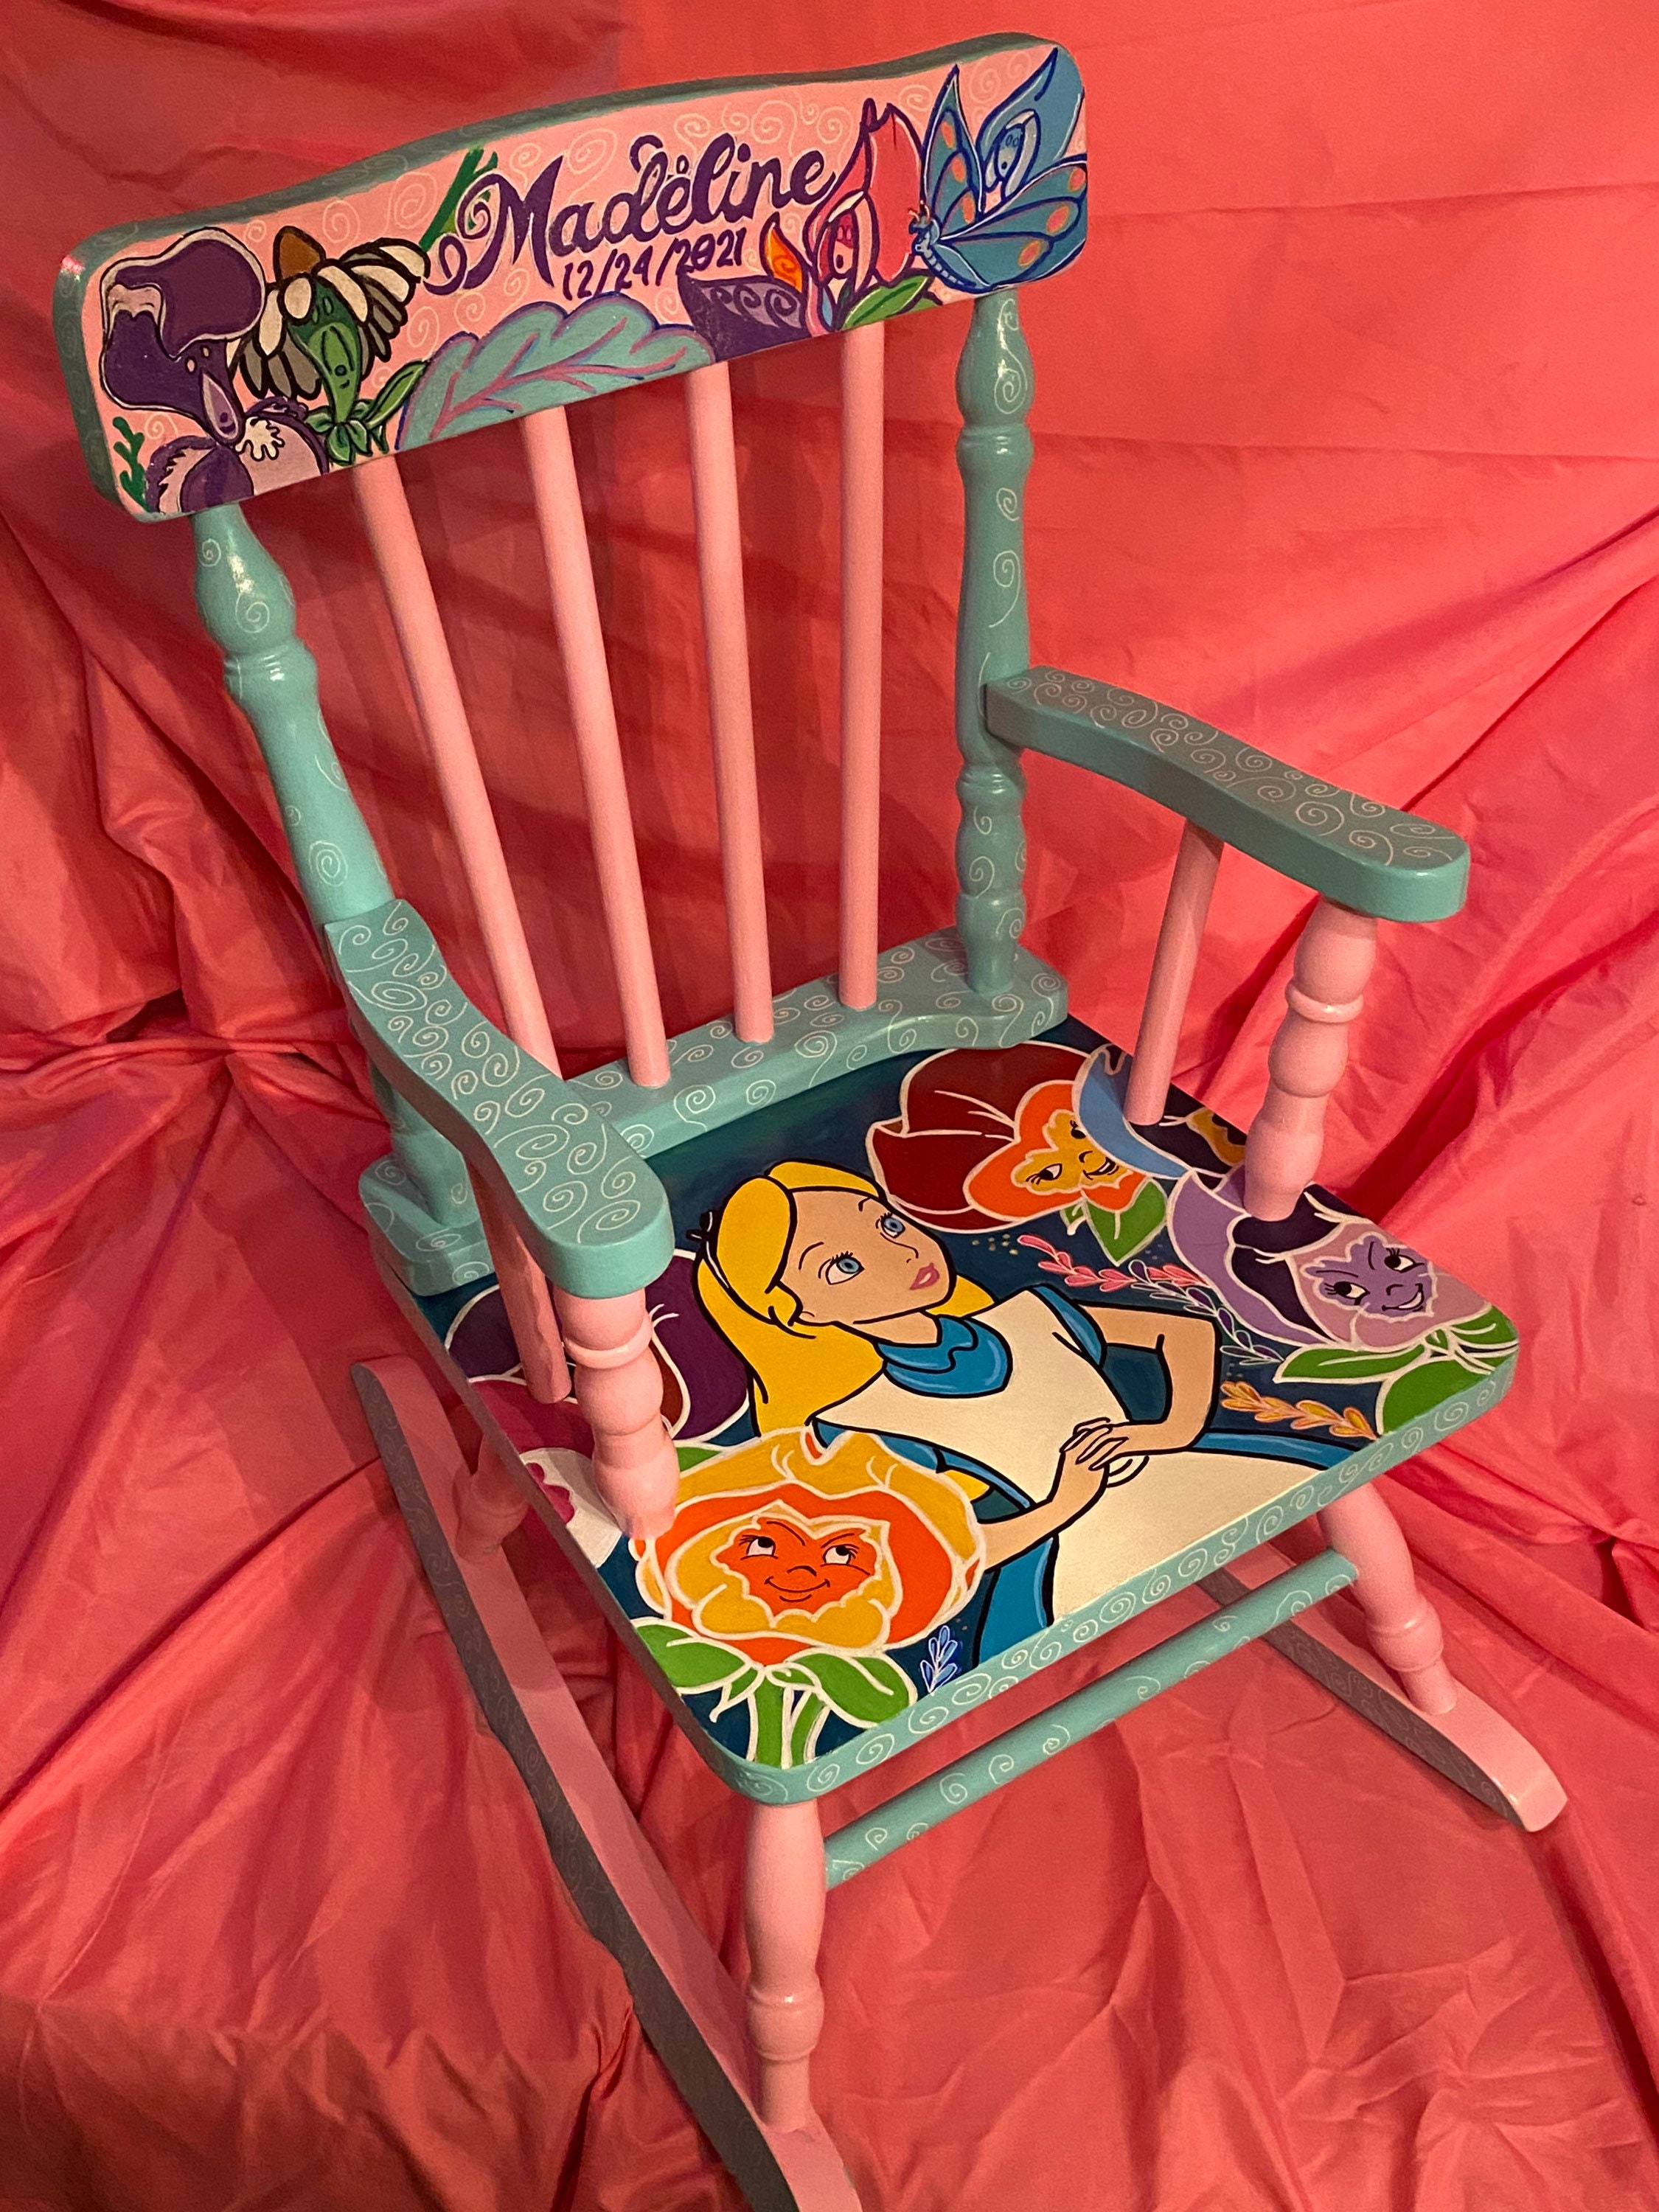 Alice & Queen Wonderland Chairs  Painting fabric chairs, Paint upholstery,  Chair